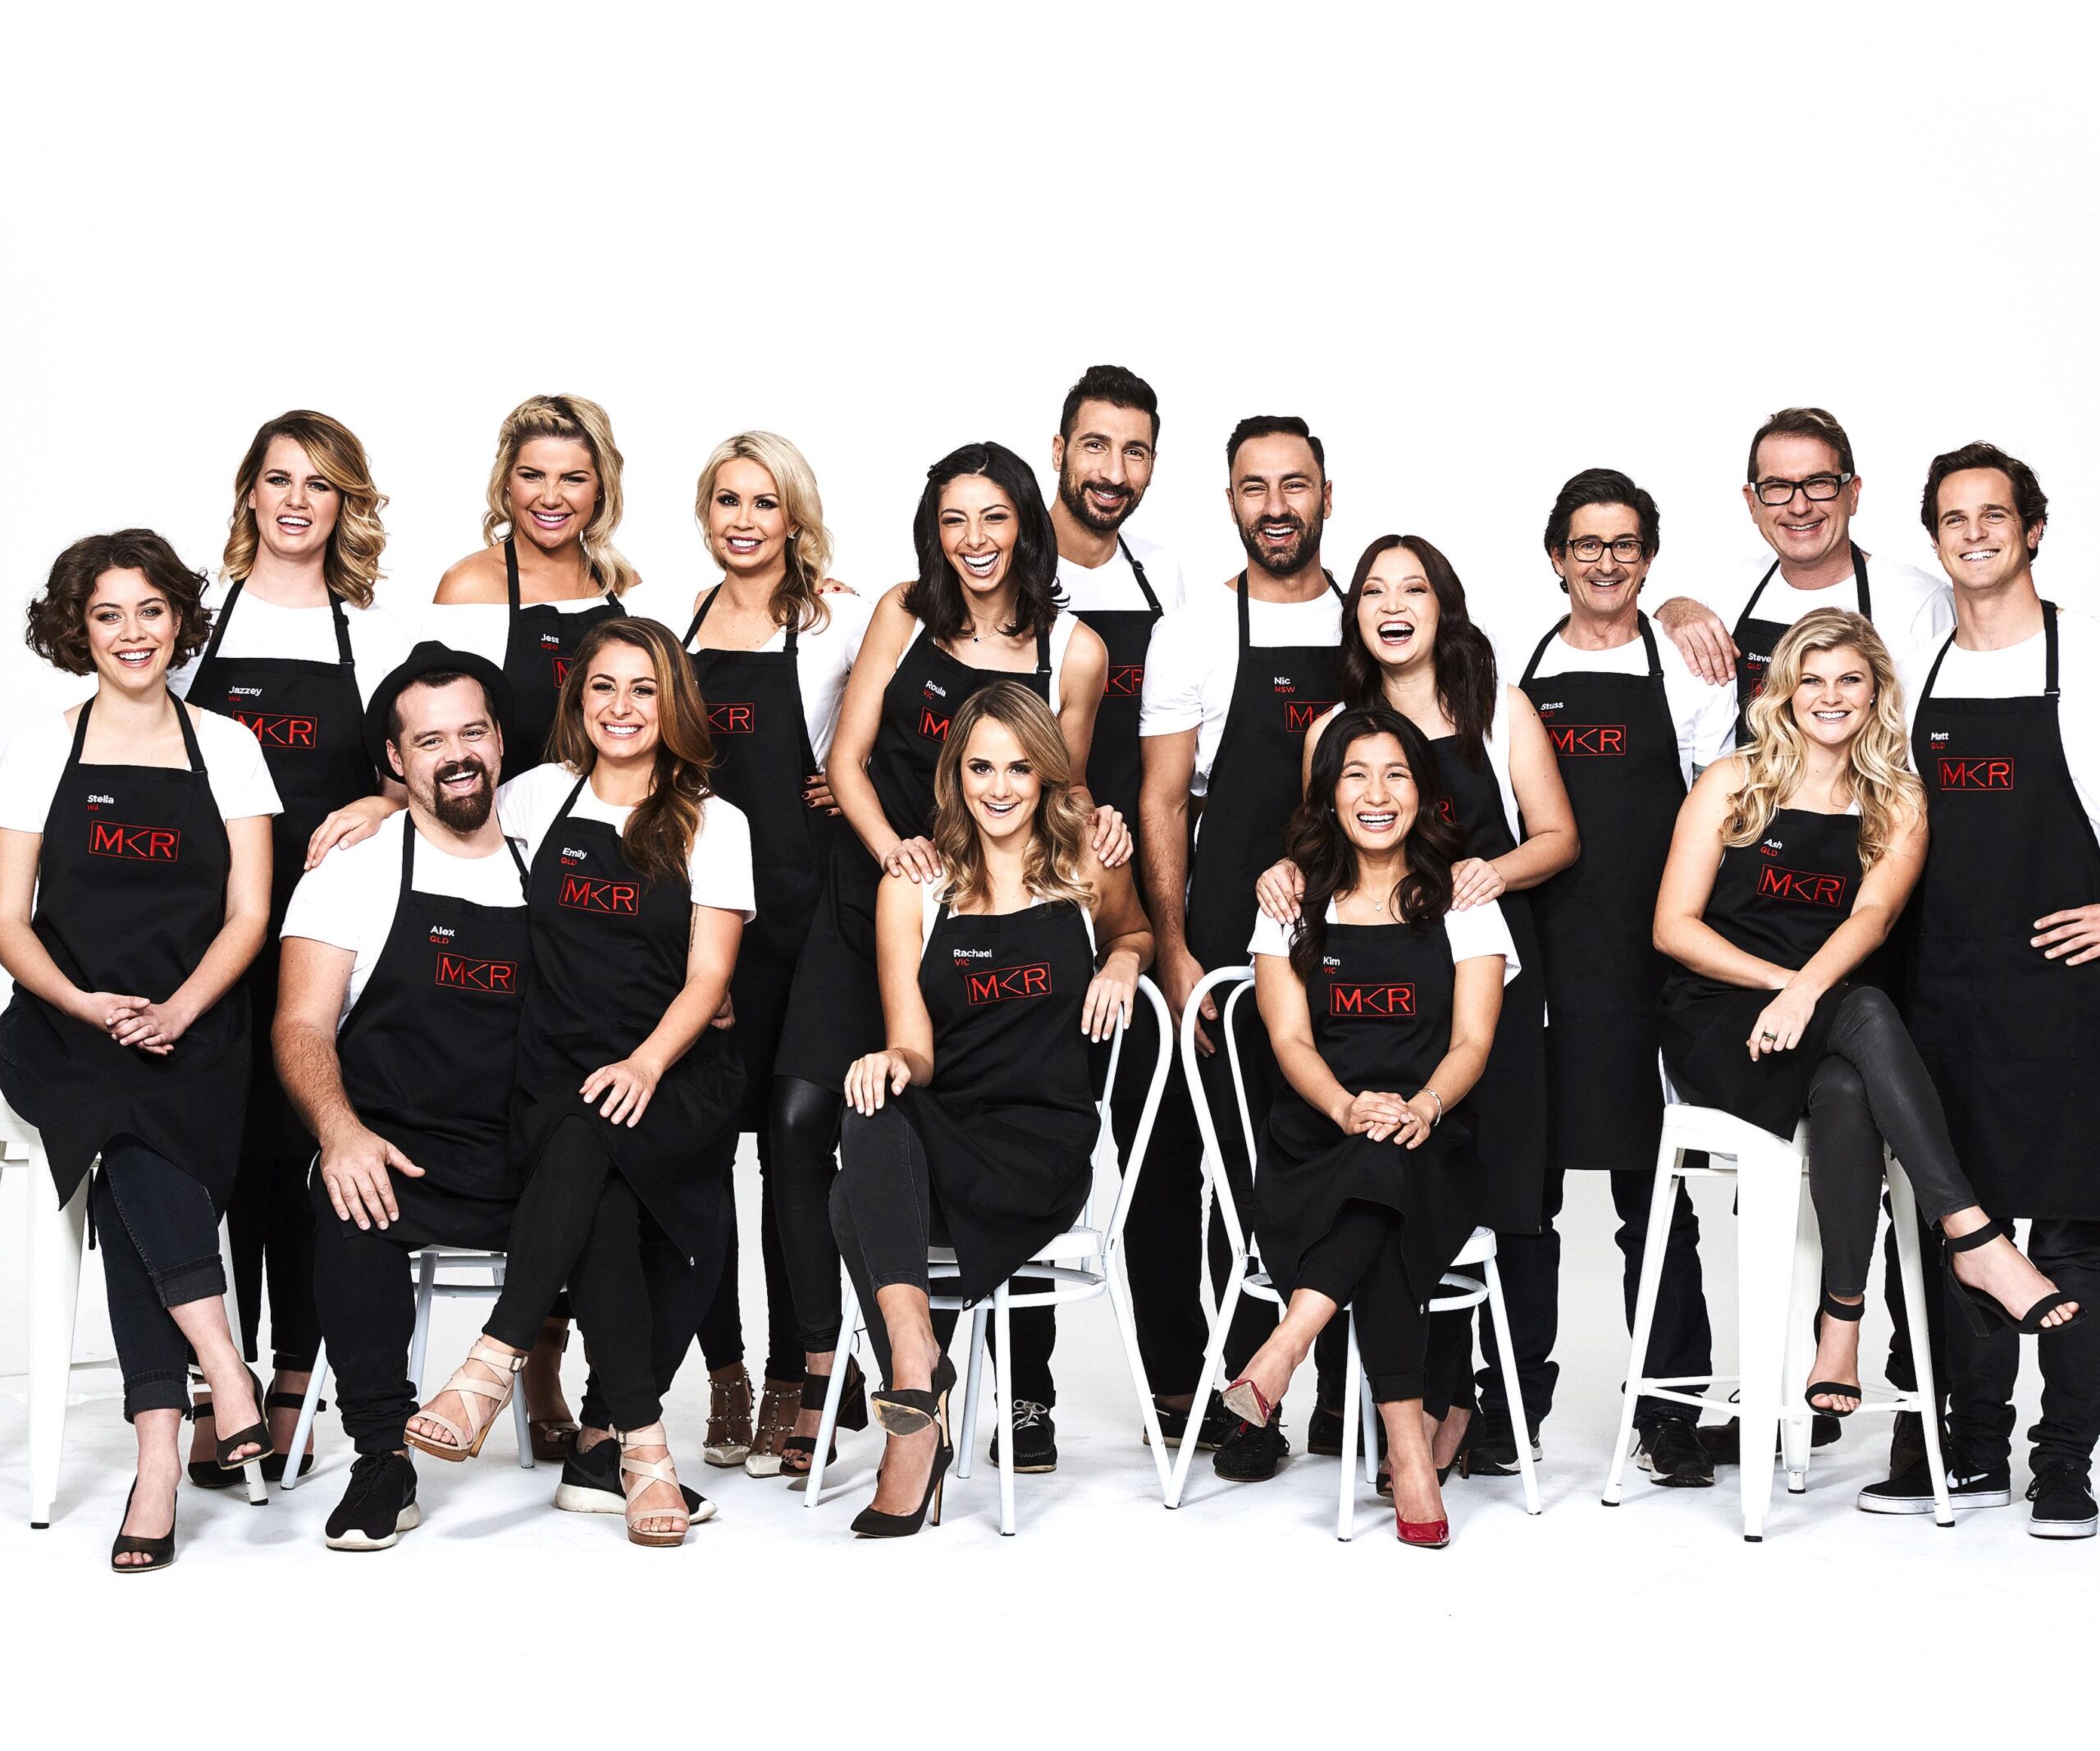 Meet the new My Kitchen Rules Australia teams set to do battle over the dining table